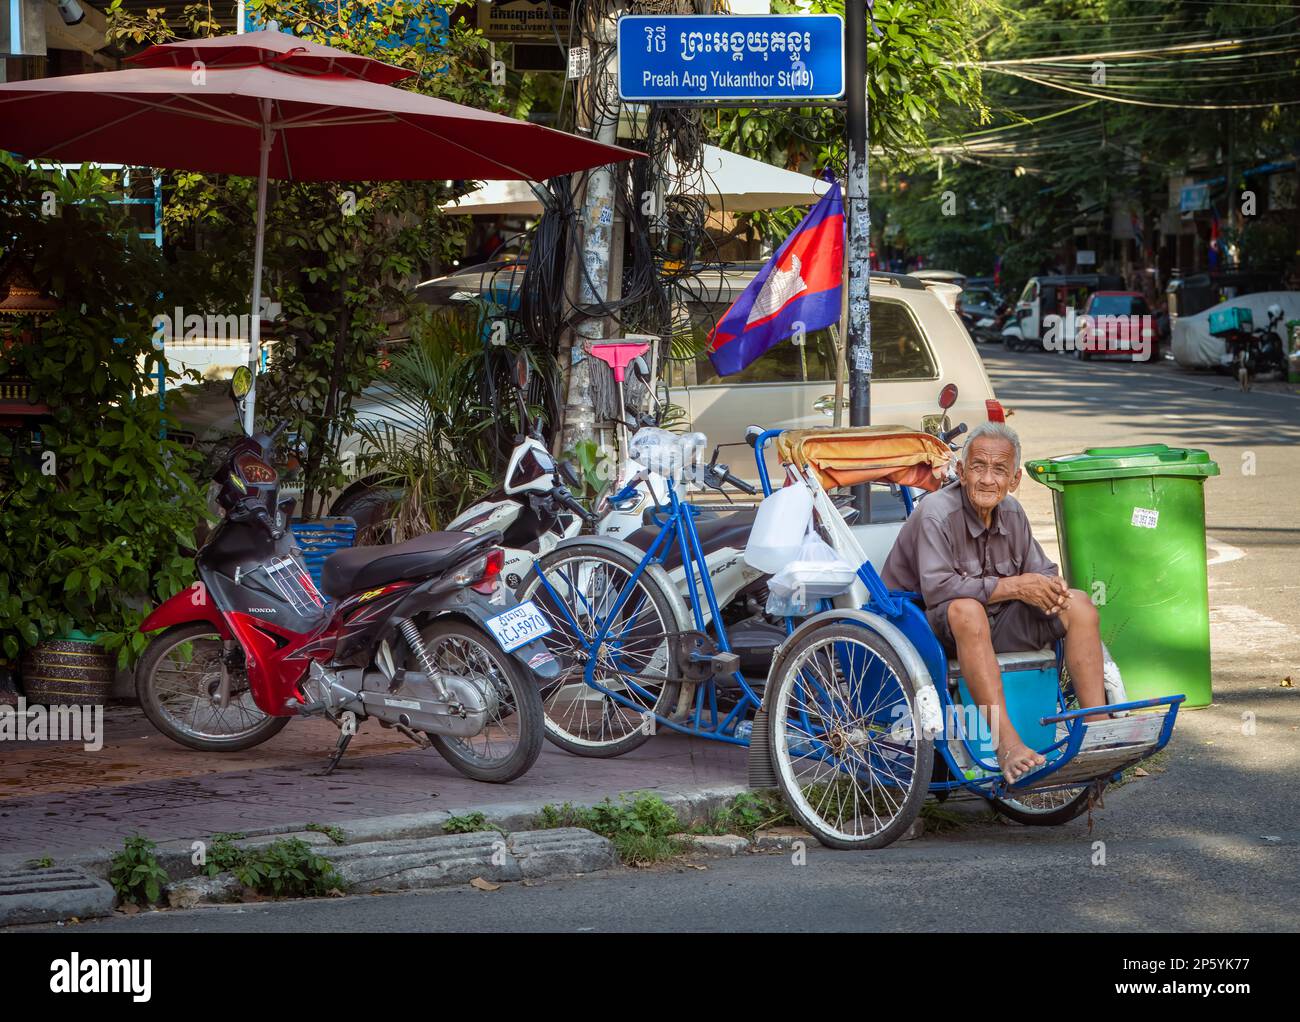 An elderly cyclo driver waits with his pedicab for a passenger on a street corner in Phnom Penh, Cambodia. Stock Photo